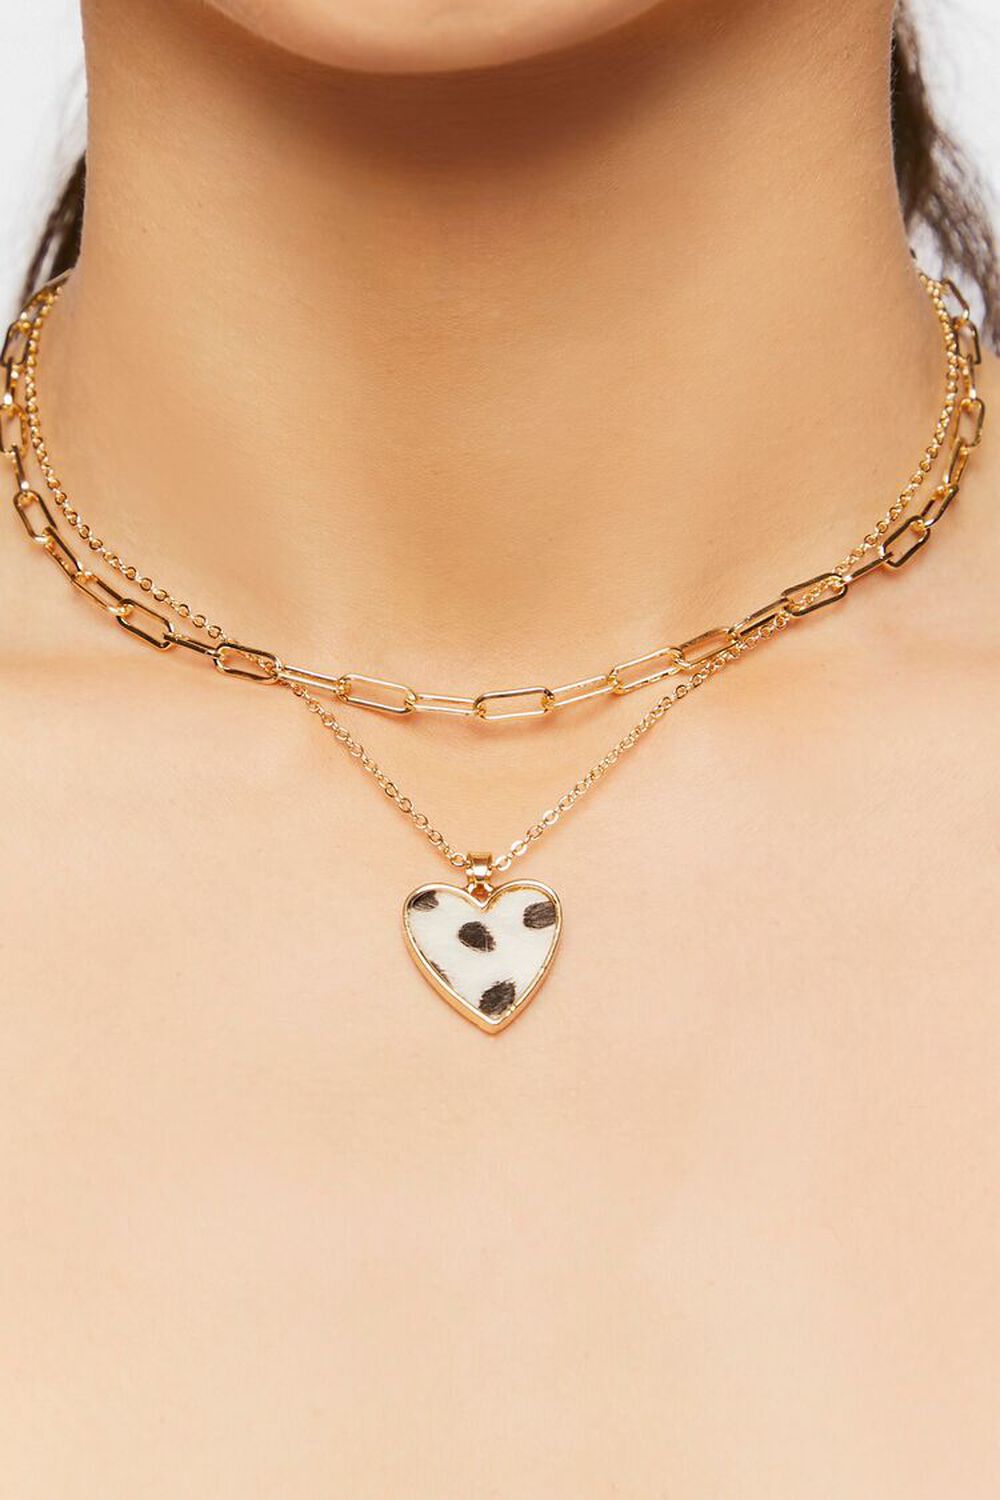 WHITE/GOLD Heart Pendant Layered Necklace, image 1